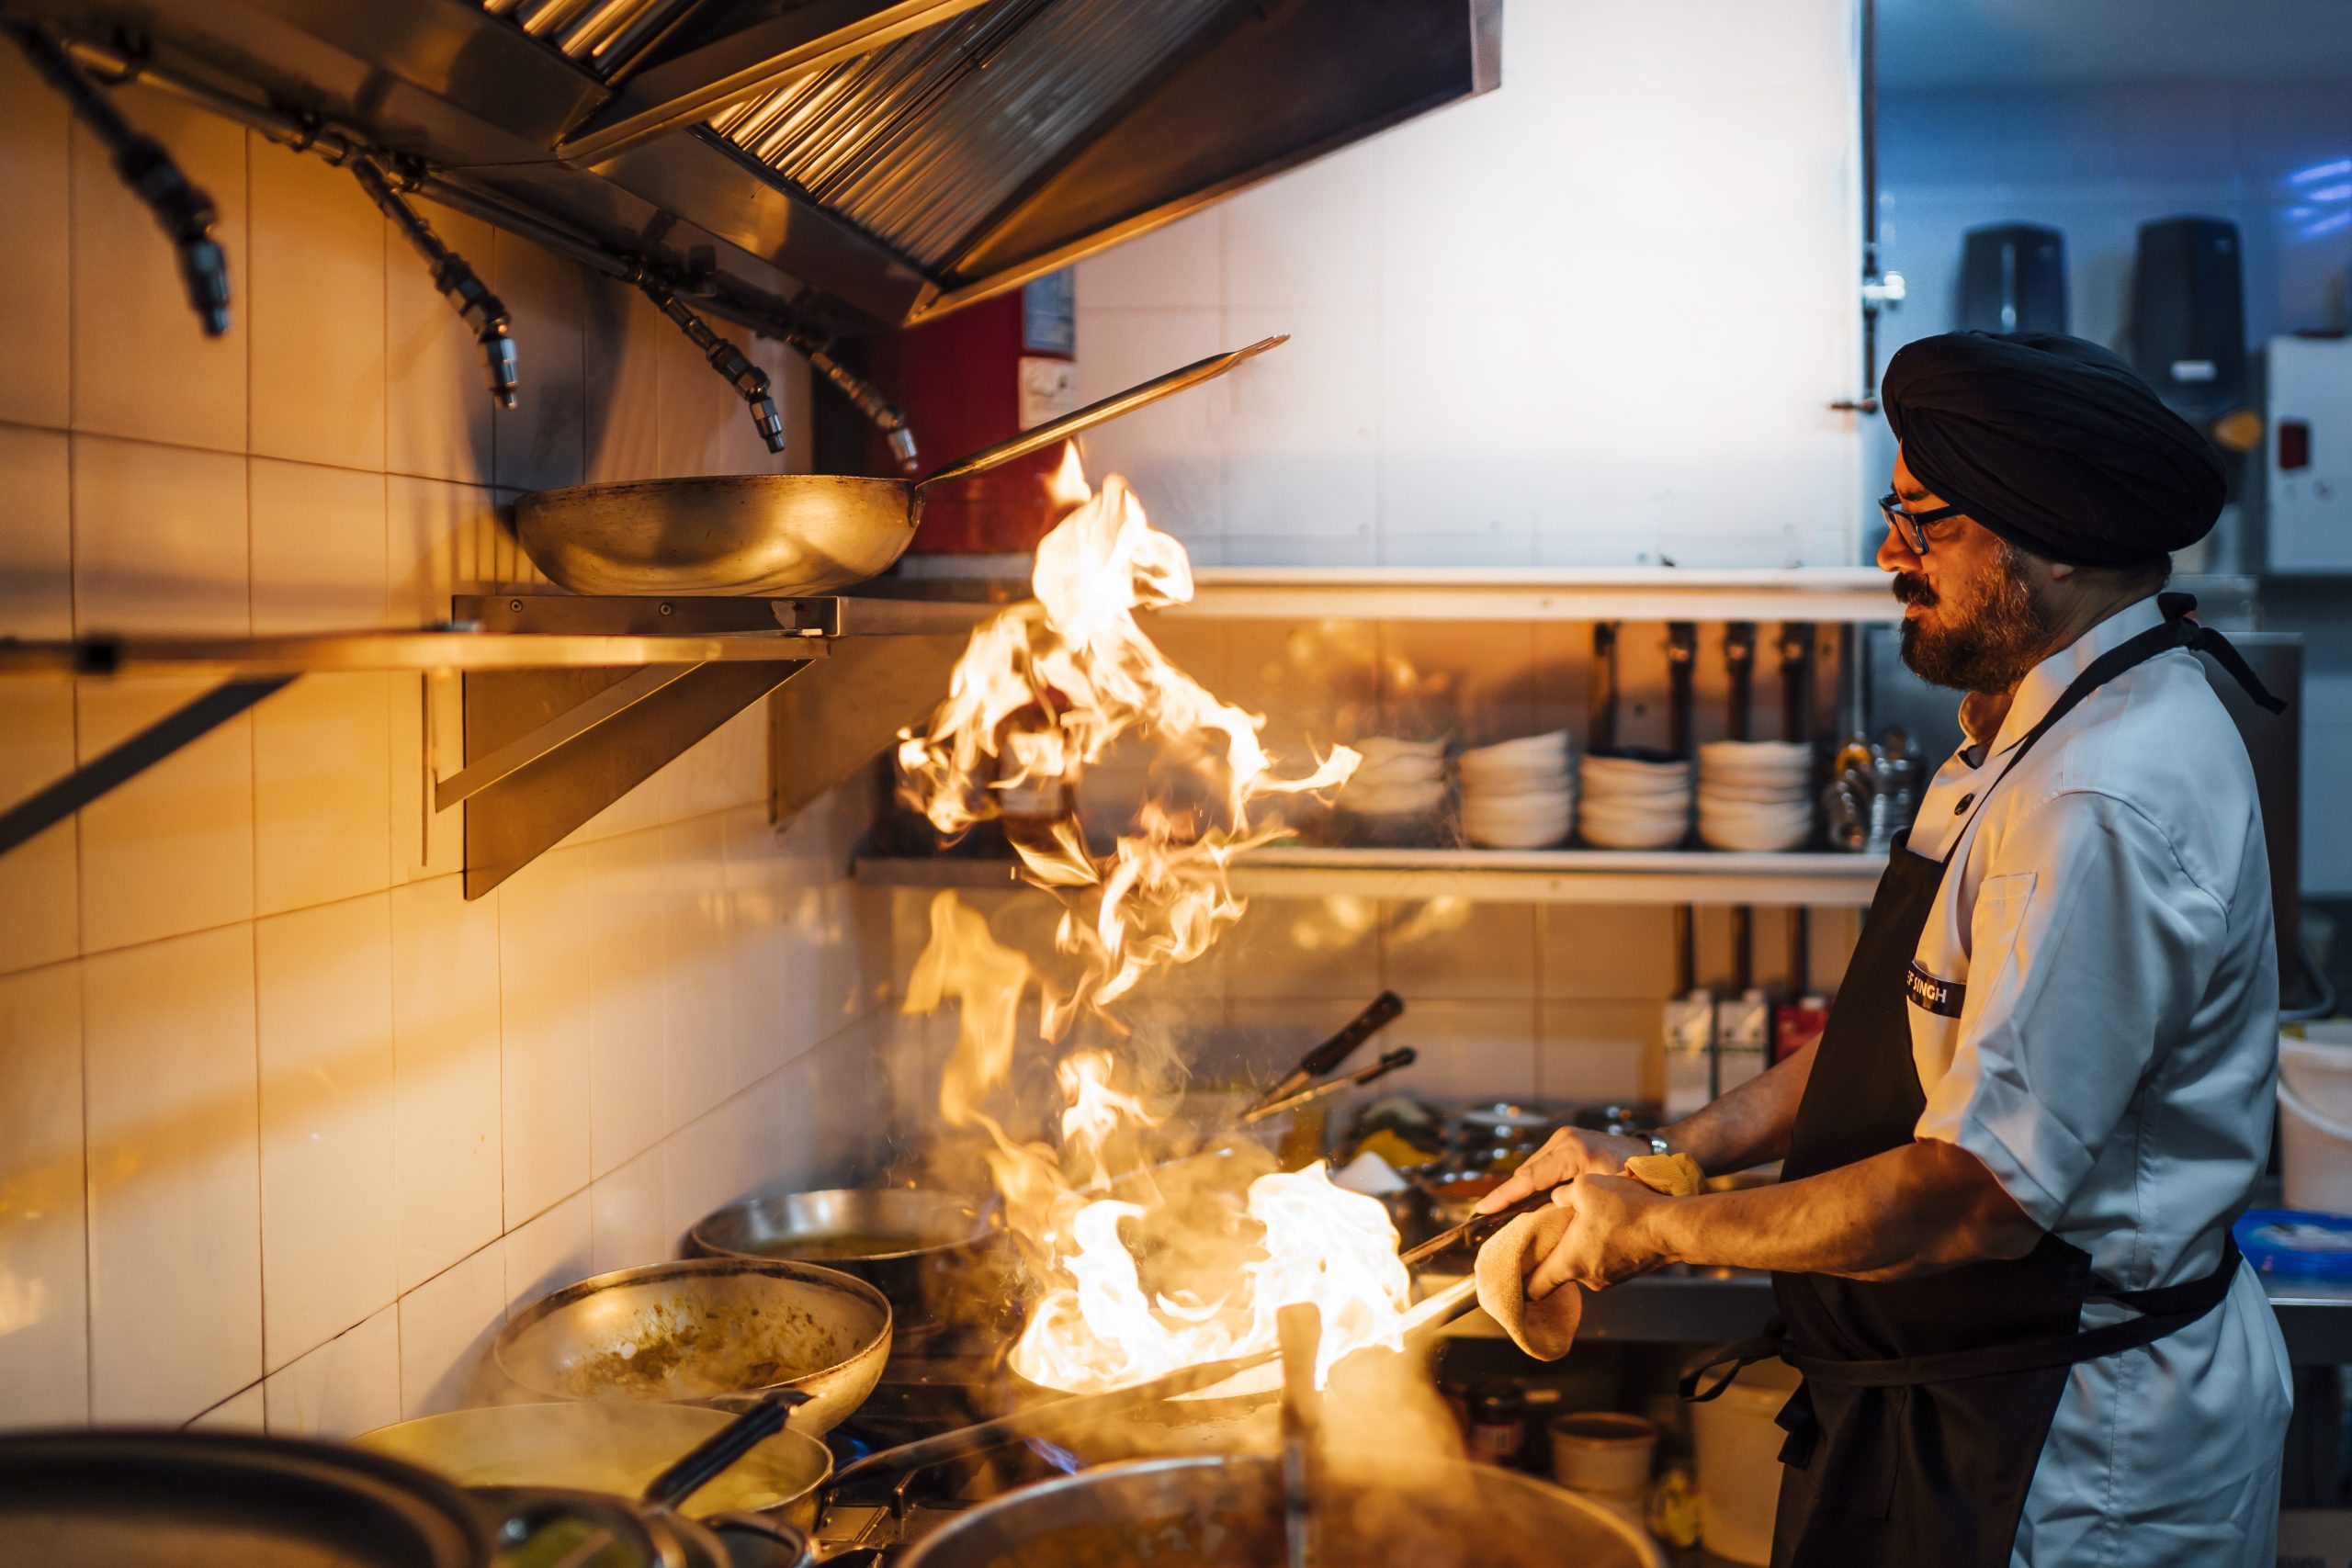 Indian chef flaming food in restaurant kitchen in Madrid.